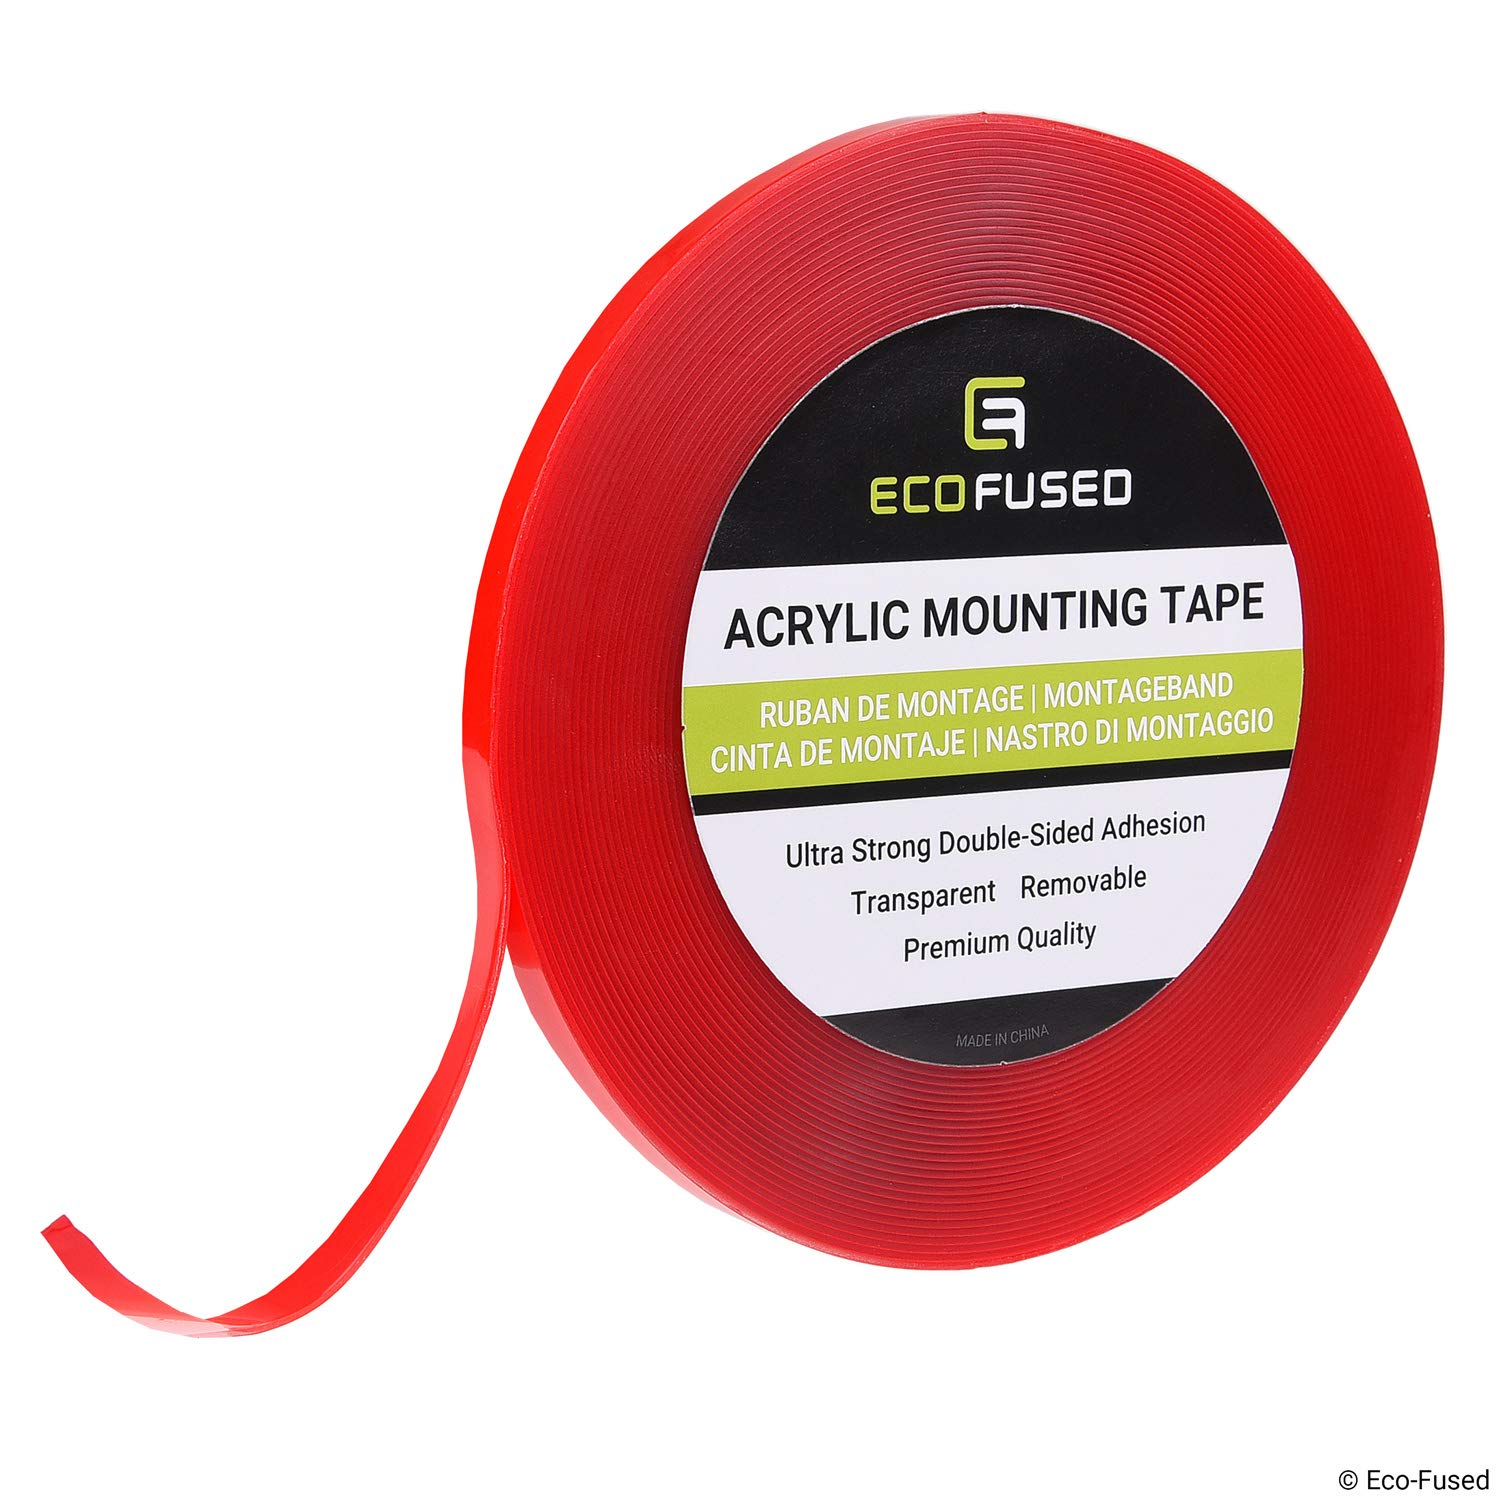 Eco-Fused Acrylic Mounting Tape 1/4" x 12.6 yards Ultra Strong Double-Sided 